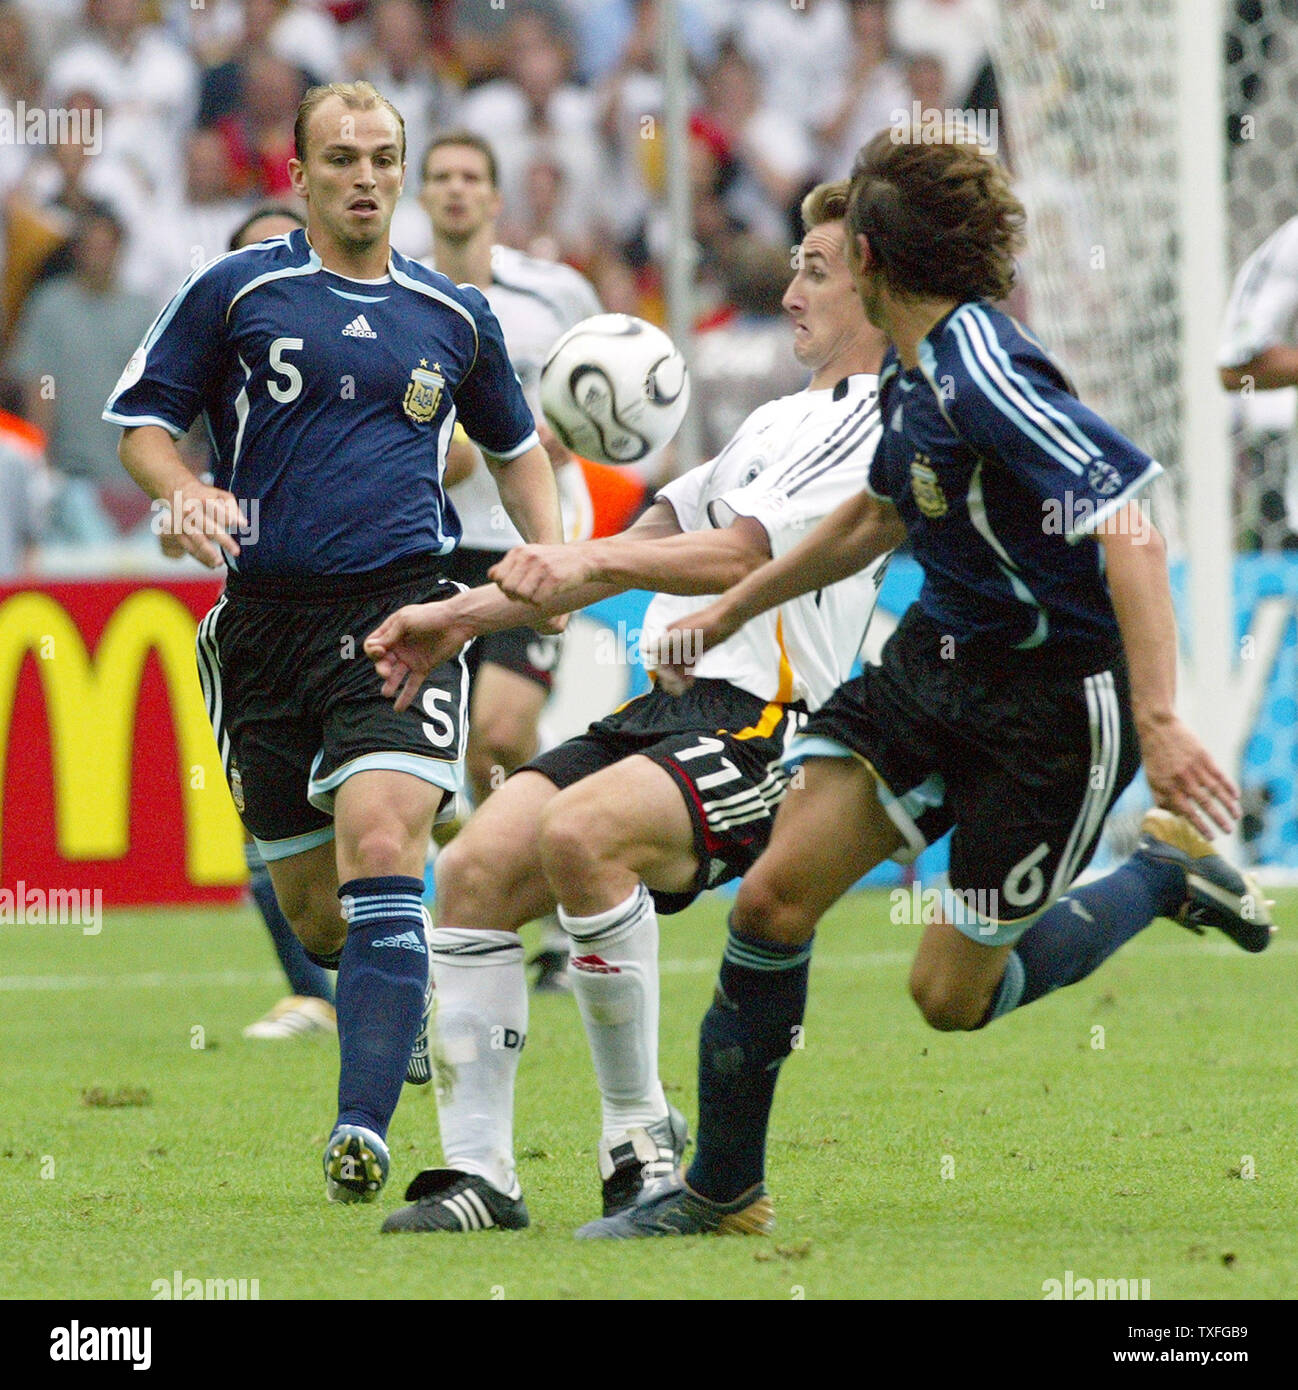 Germany's Miroslav Klose (C) fights with Argentina's Esteban Cambiasso (5) and Gabriel Heinze (6)for the ball during World Cup soccer at Olympiastadion on Friday, June 30, 2006 in Berlin, Germany. Germany defeated Argentina 4-2.   (UPI Photo/Arthur Thill) Stock Photo